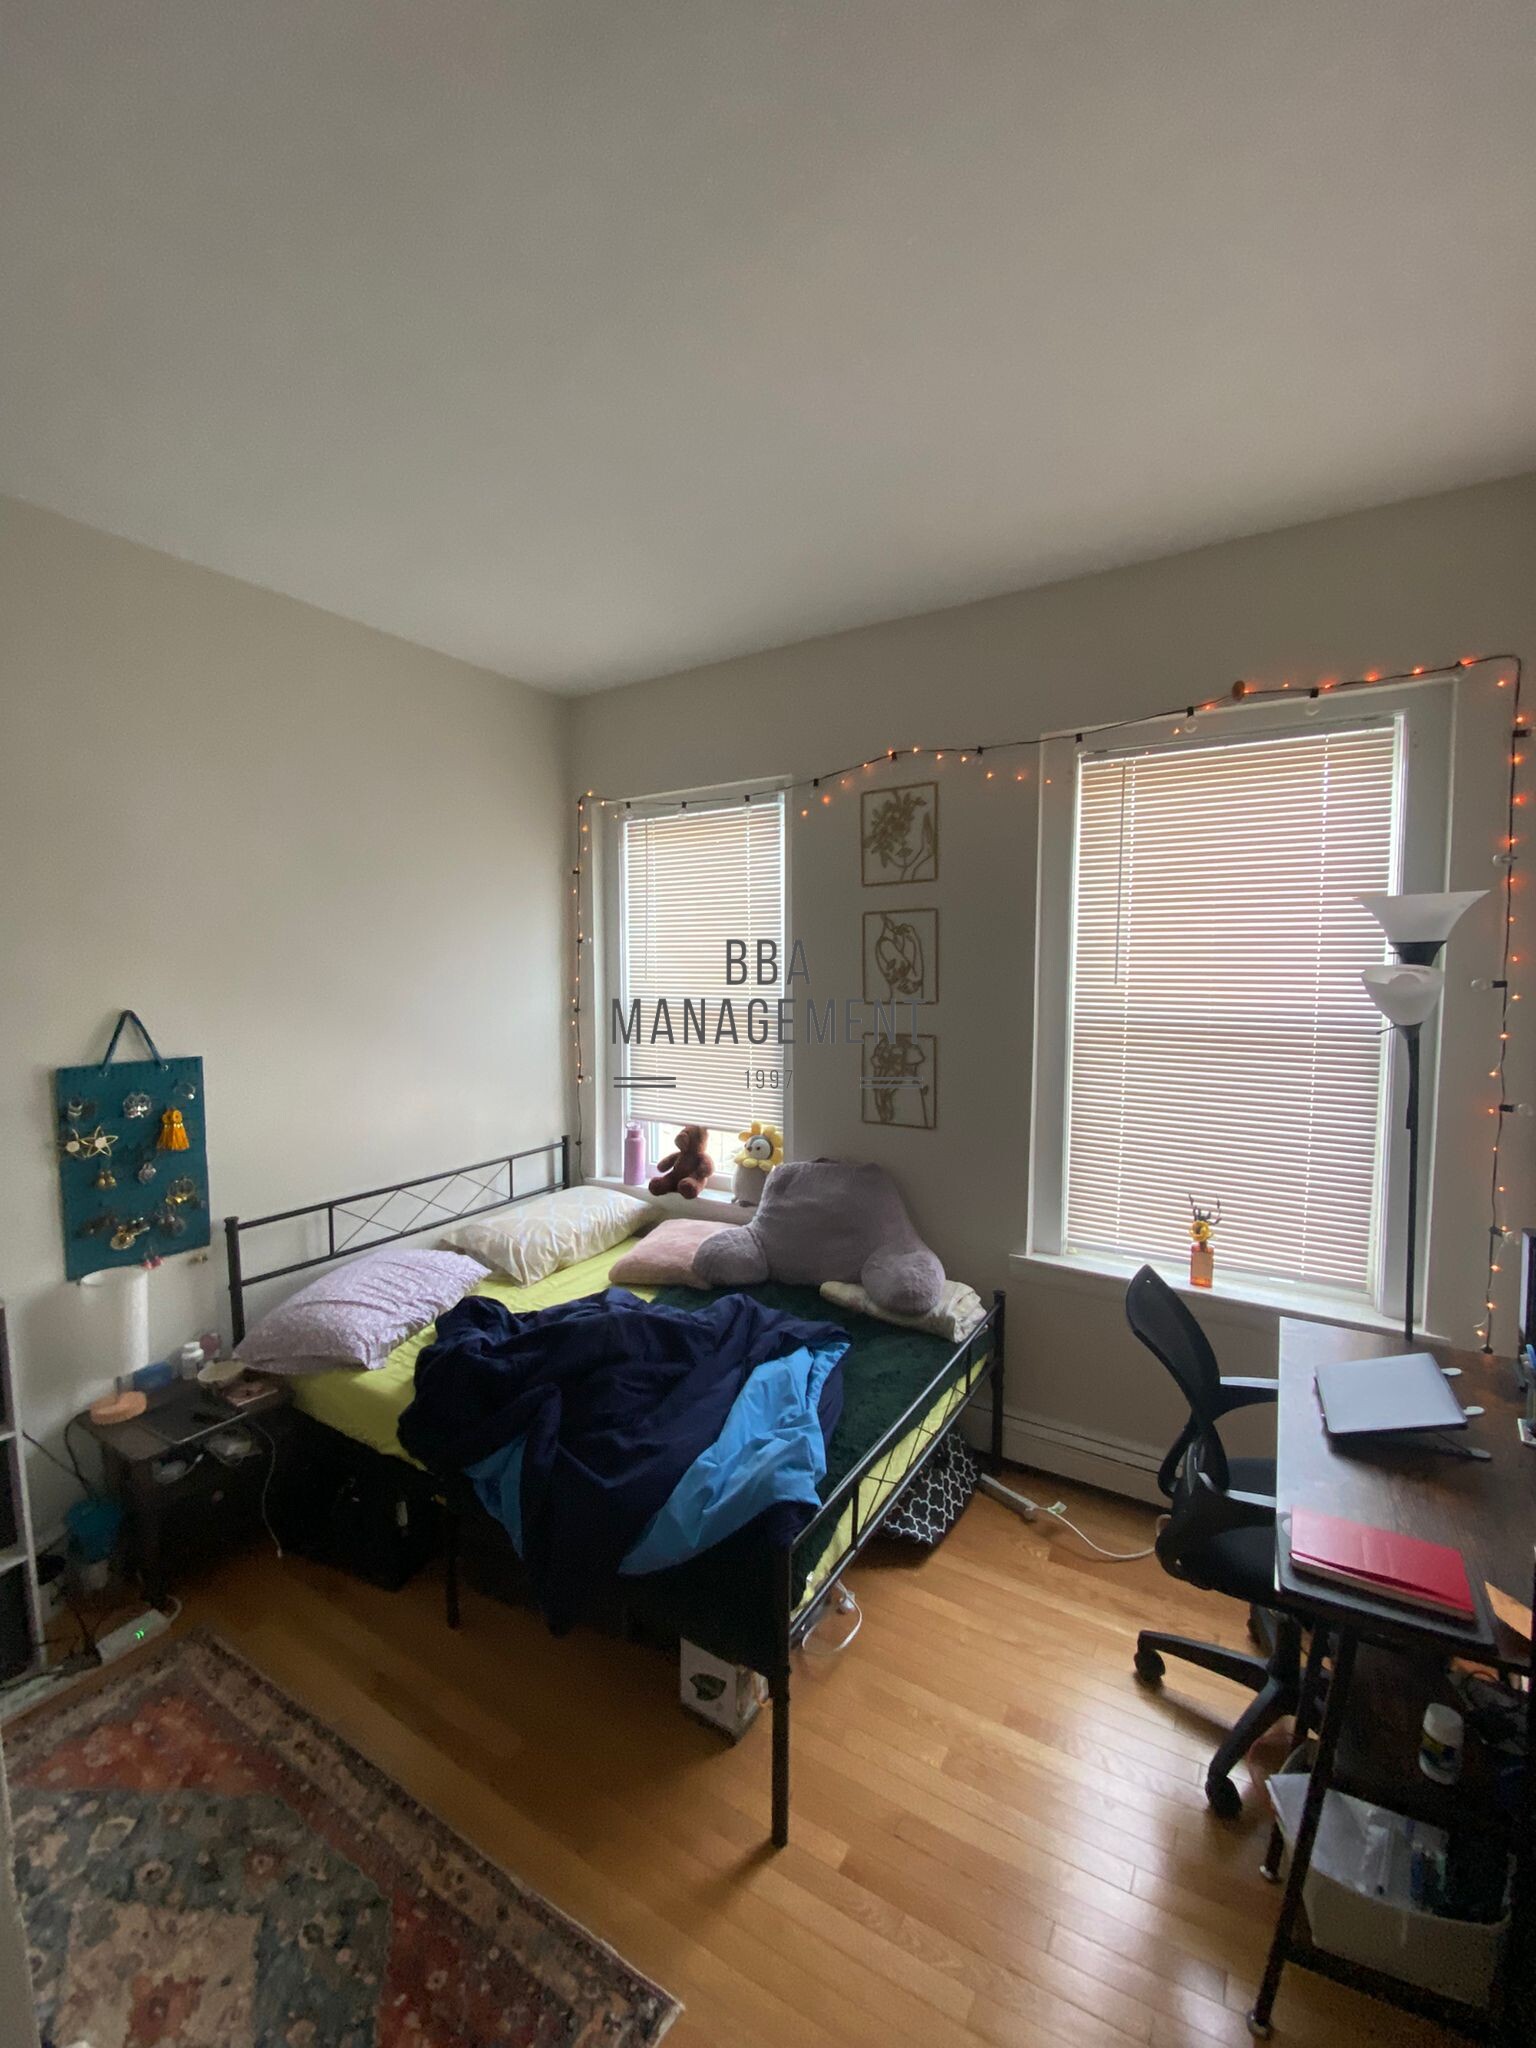 Photos of apartment on Chester St.,Boston MA 02134